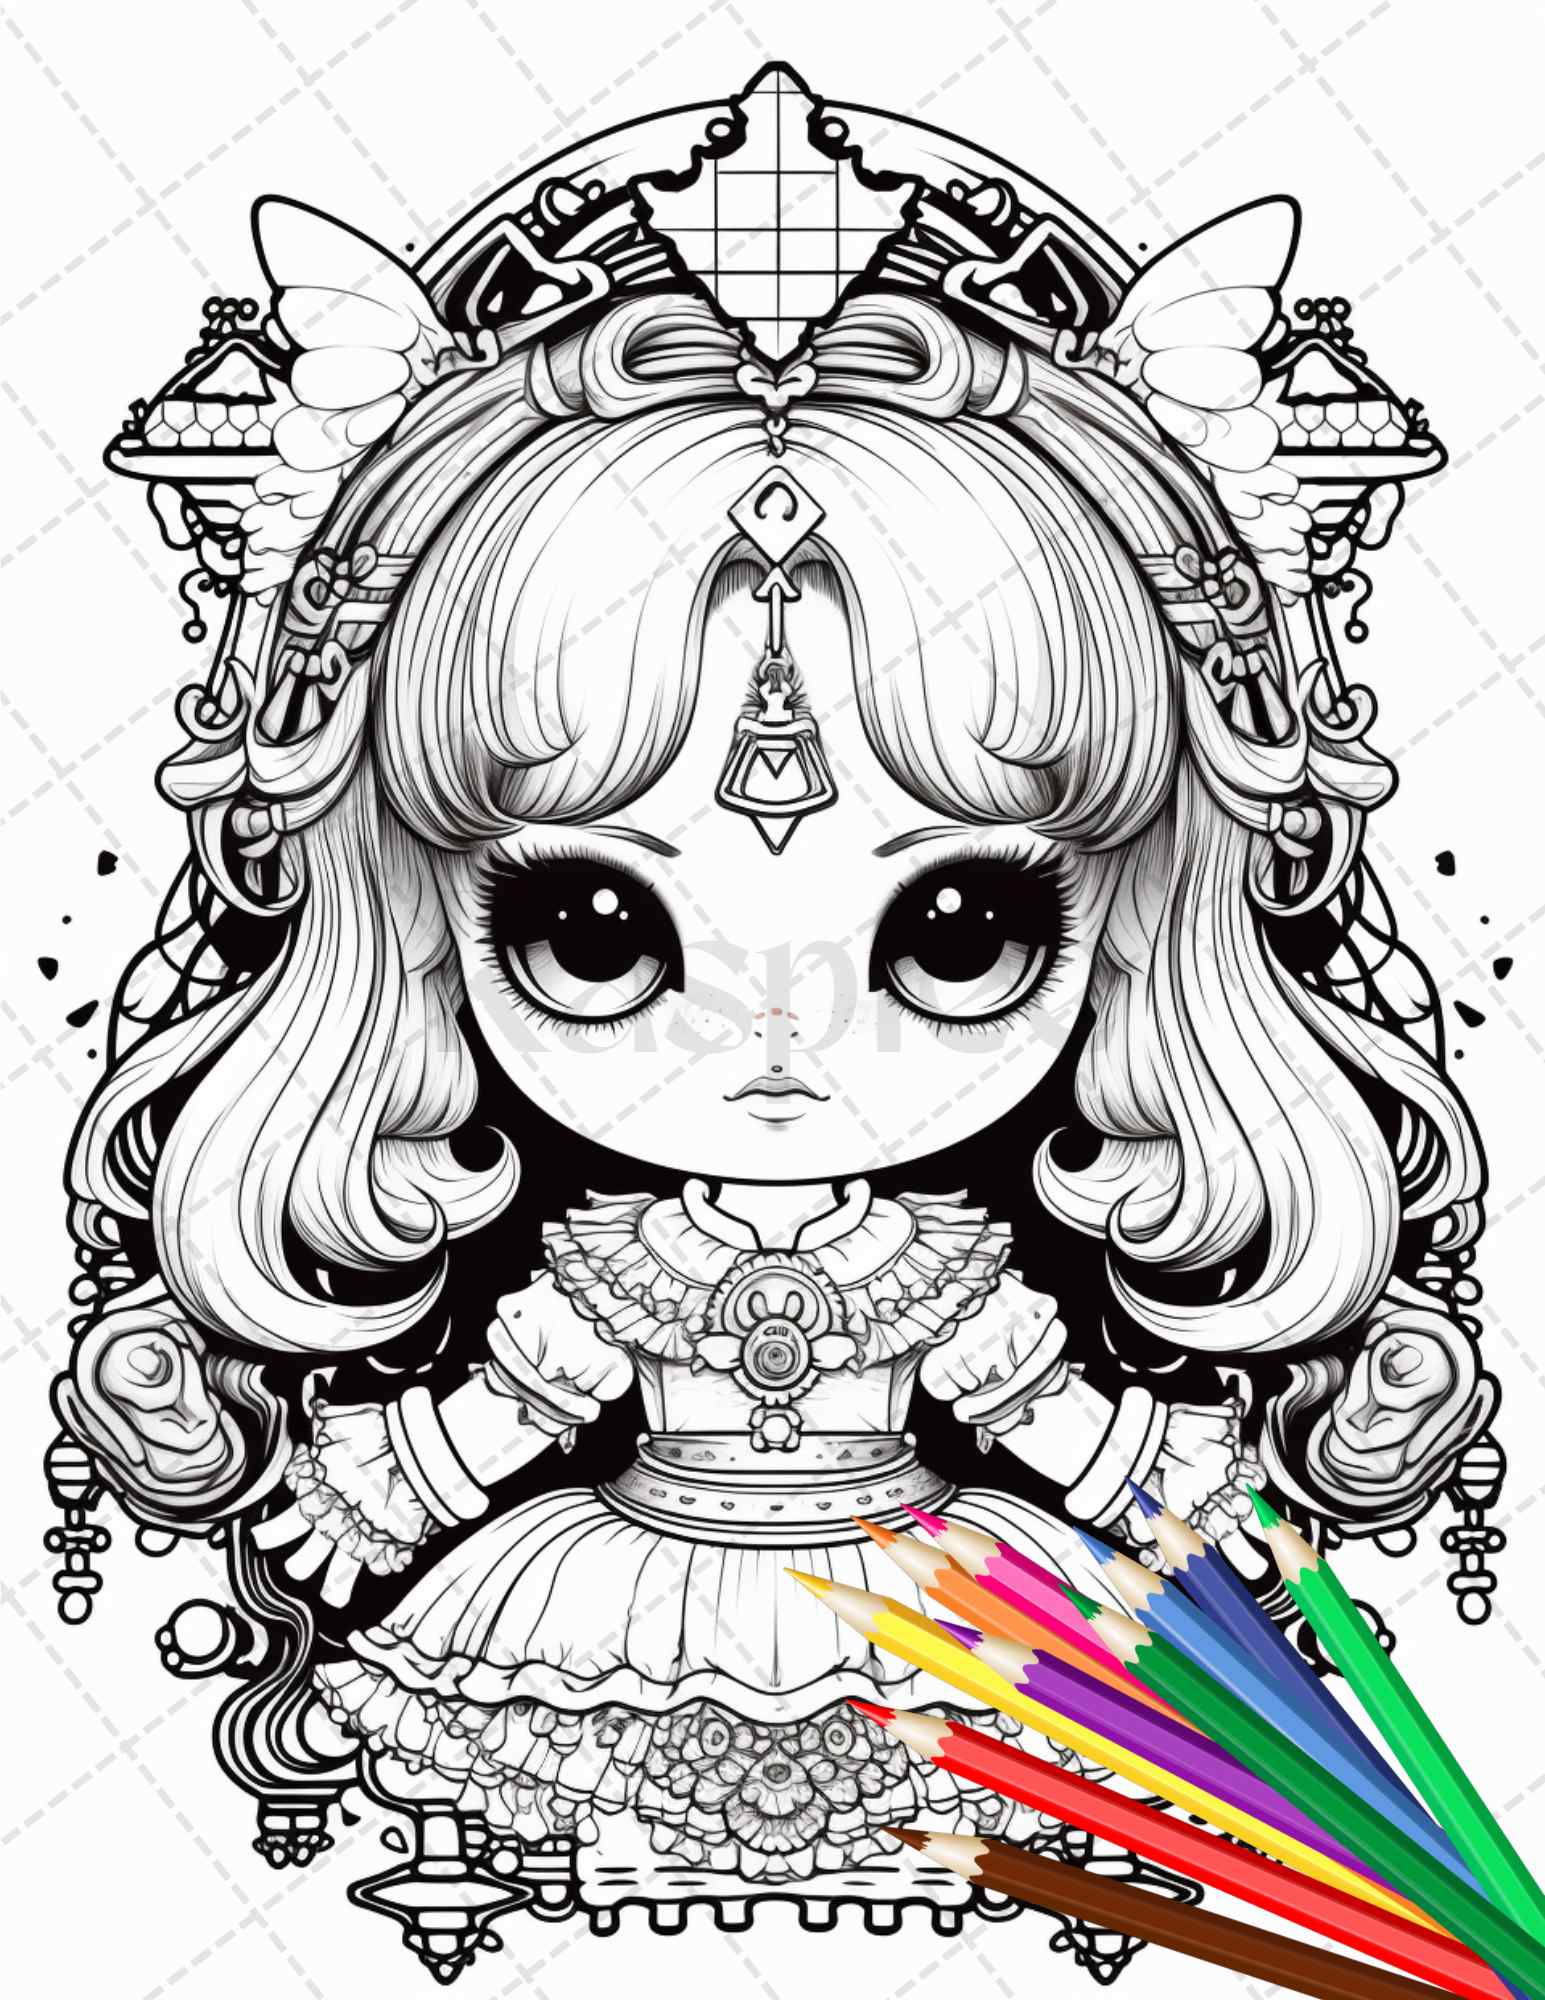 Creepy Kawaii CHIBI Horror Beauty Pastel Goth Adult Reverse Coloring Book  With Black Pages for Depression